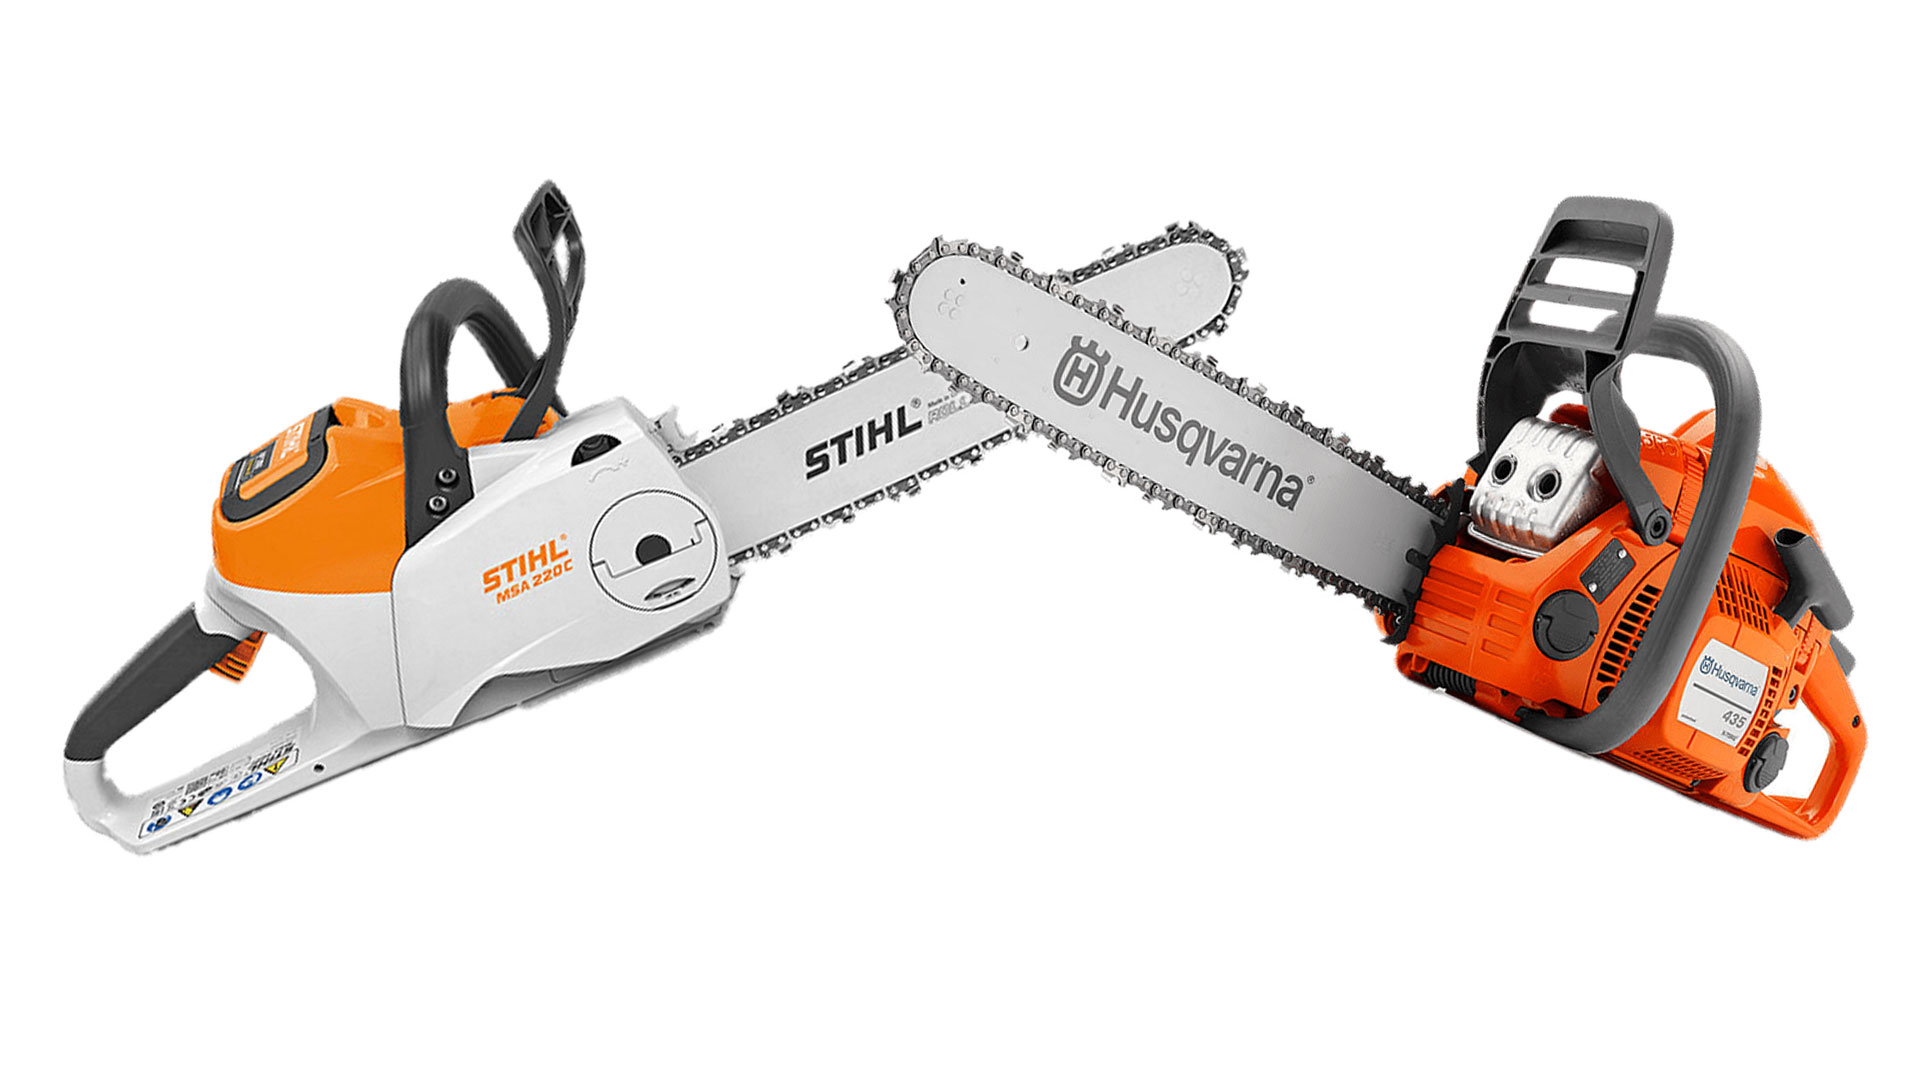 Husqvarna vs Stihl chainsaws: which is the best choice?